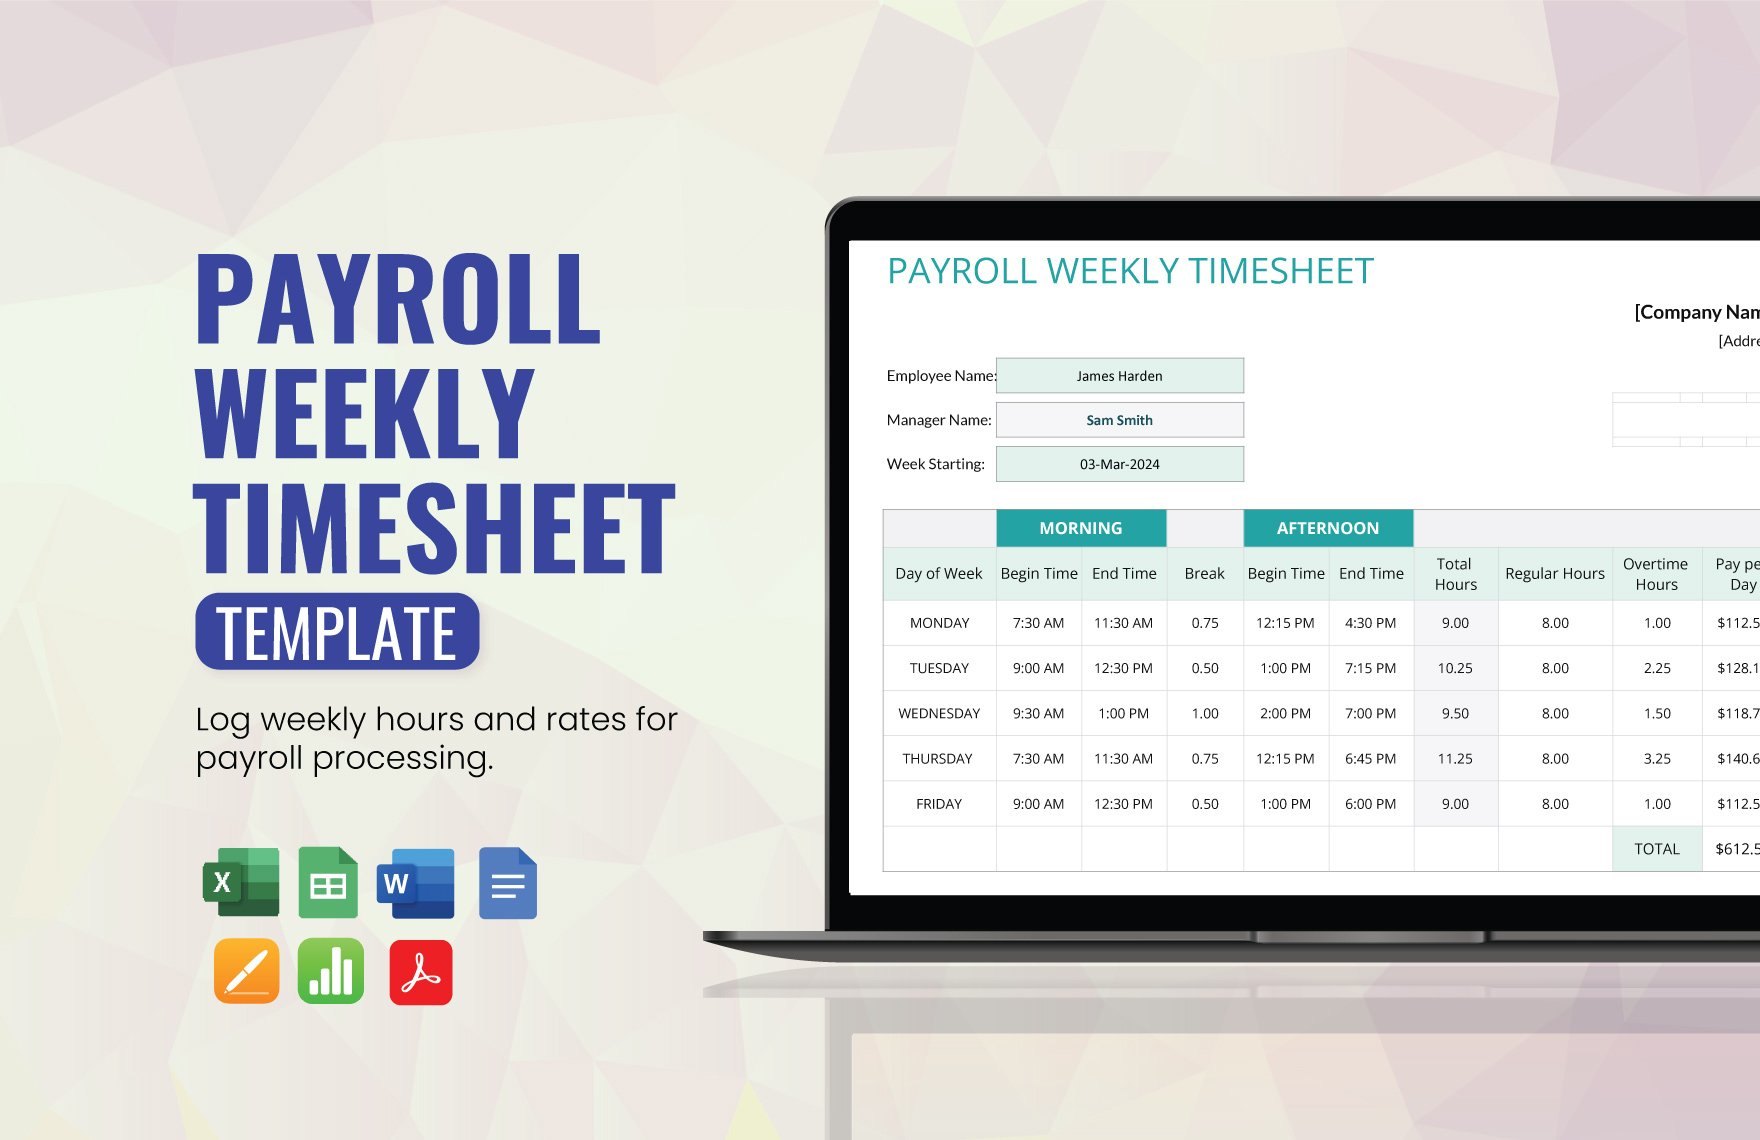 Payroll Weekly Timesheet Template in Word, Google Docs, Excel, PDF, Google Sheets, Apple Pages, Apple Numbers